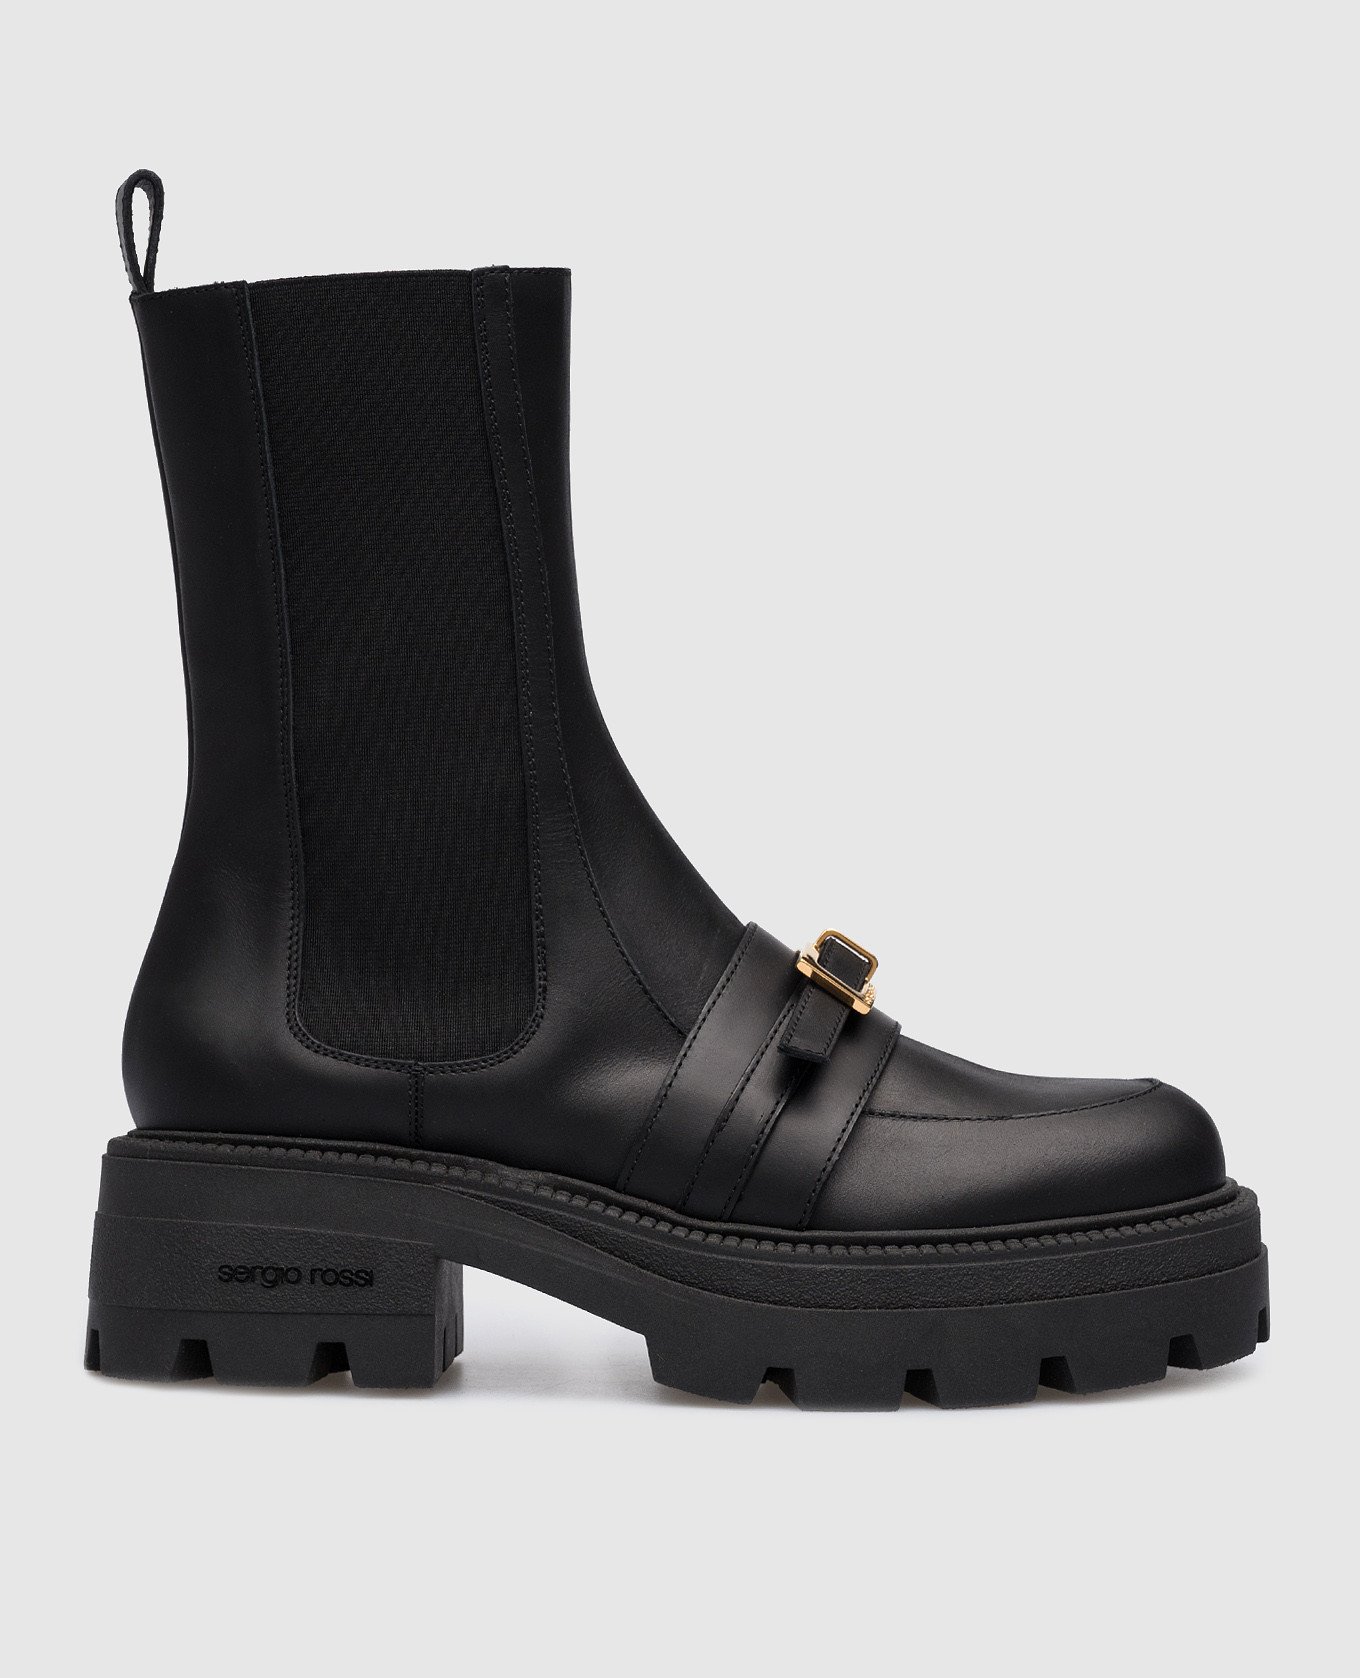 Nora black leather chelsea boots